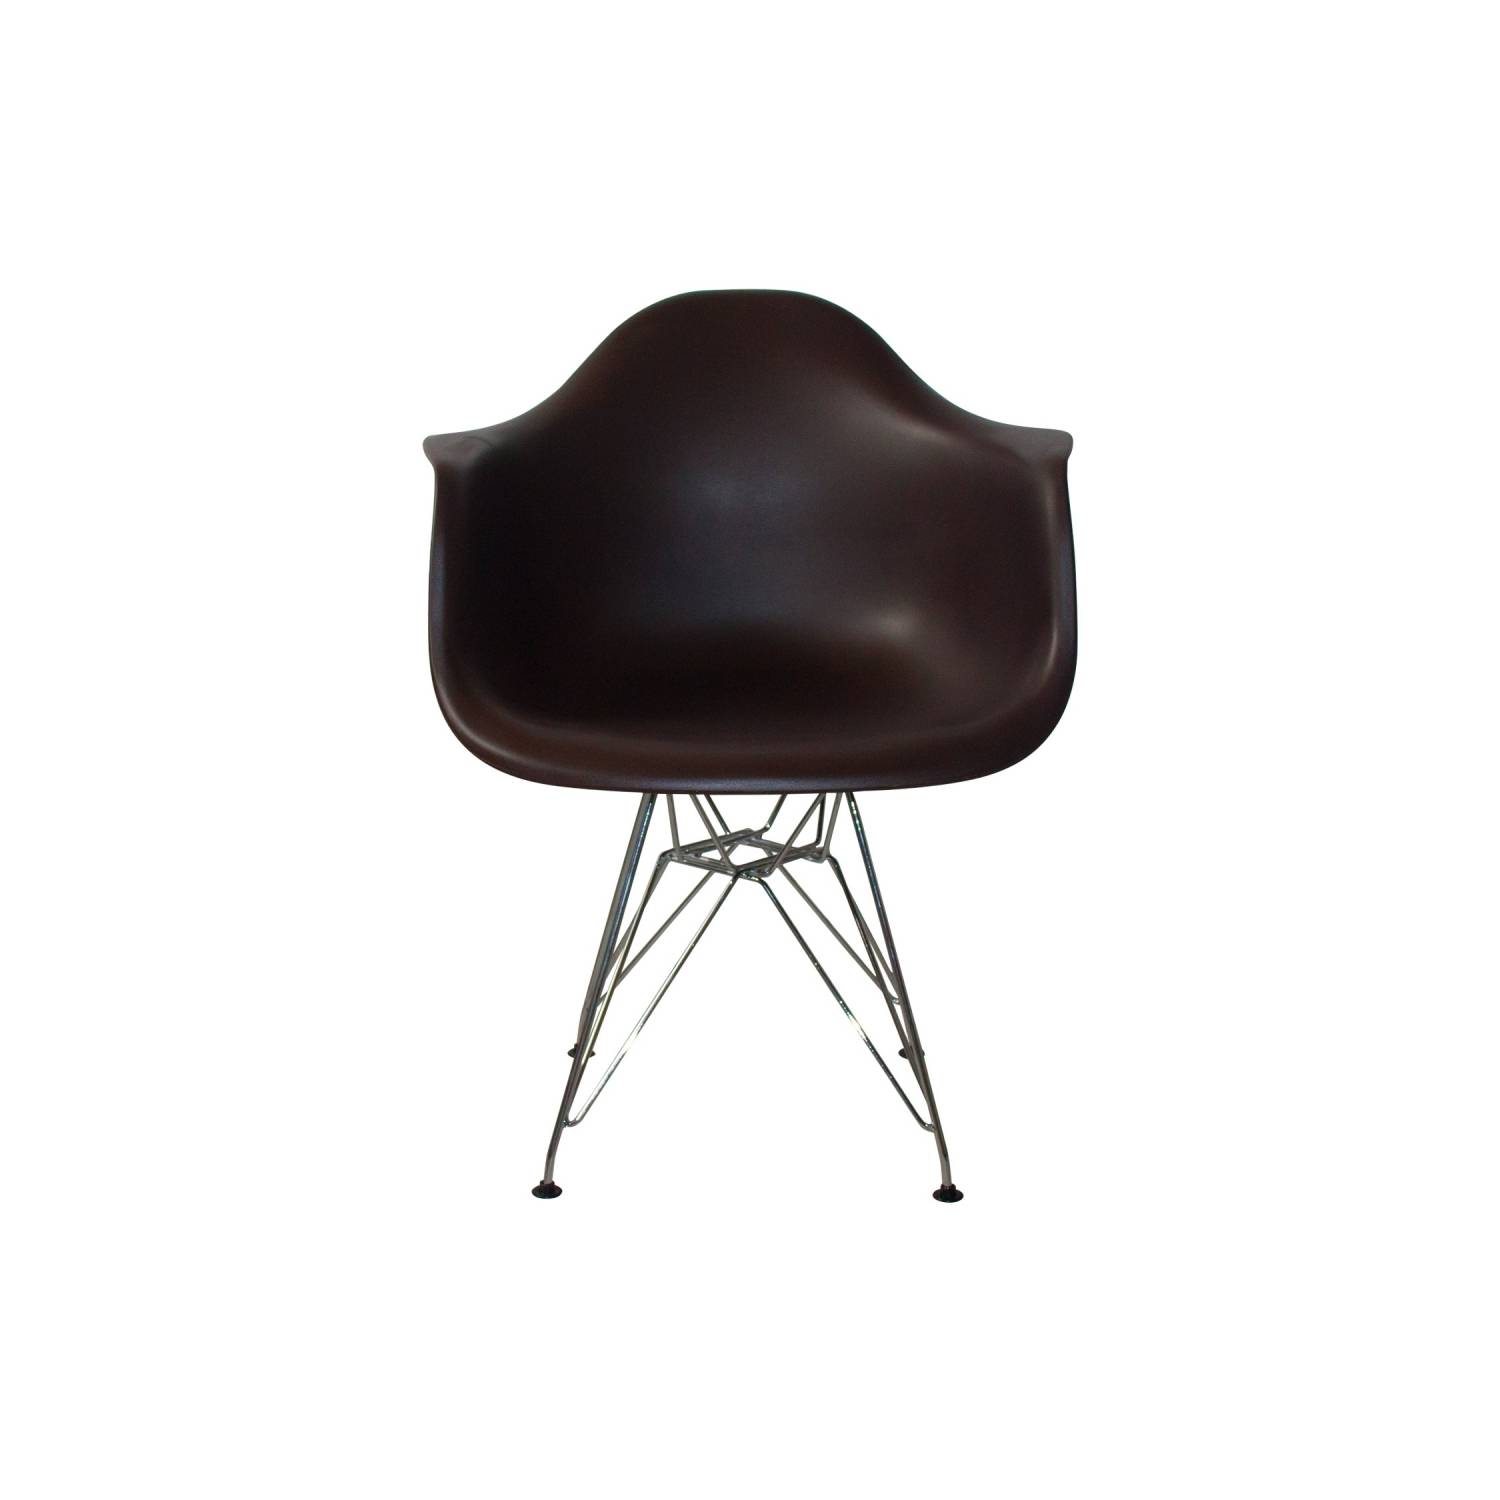 PACK 4 SILLONES TOWER CHROME CHOCOLATE